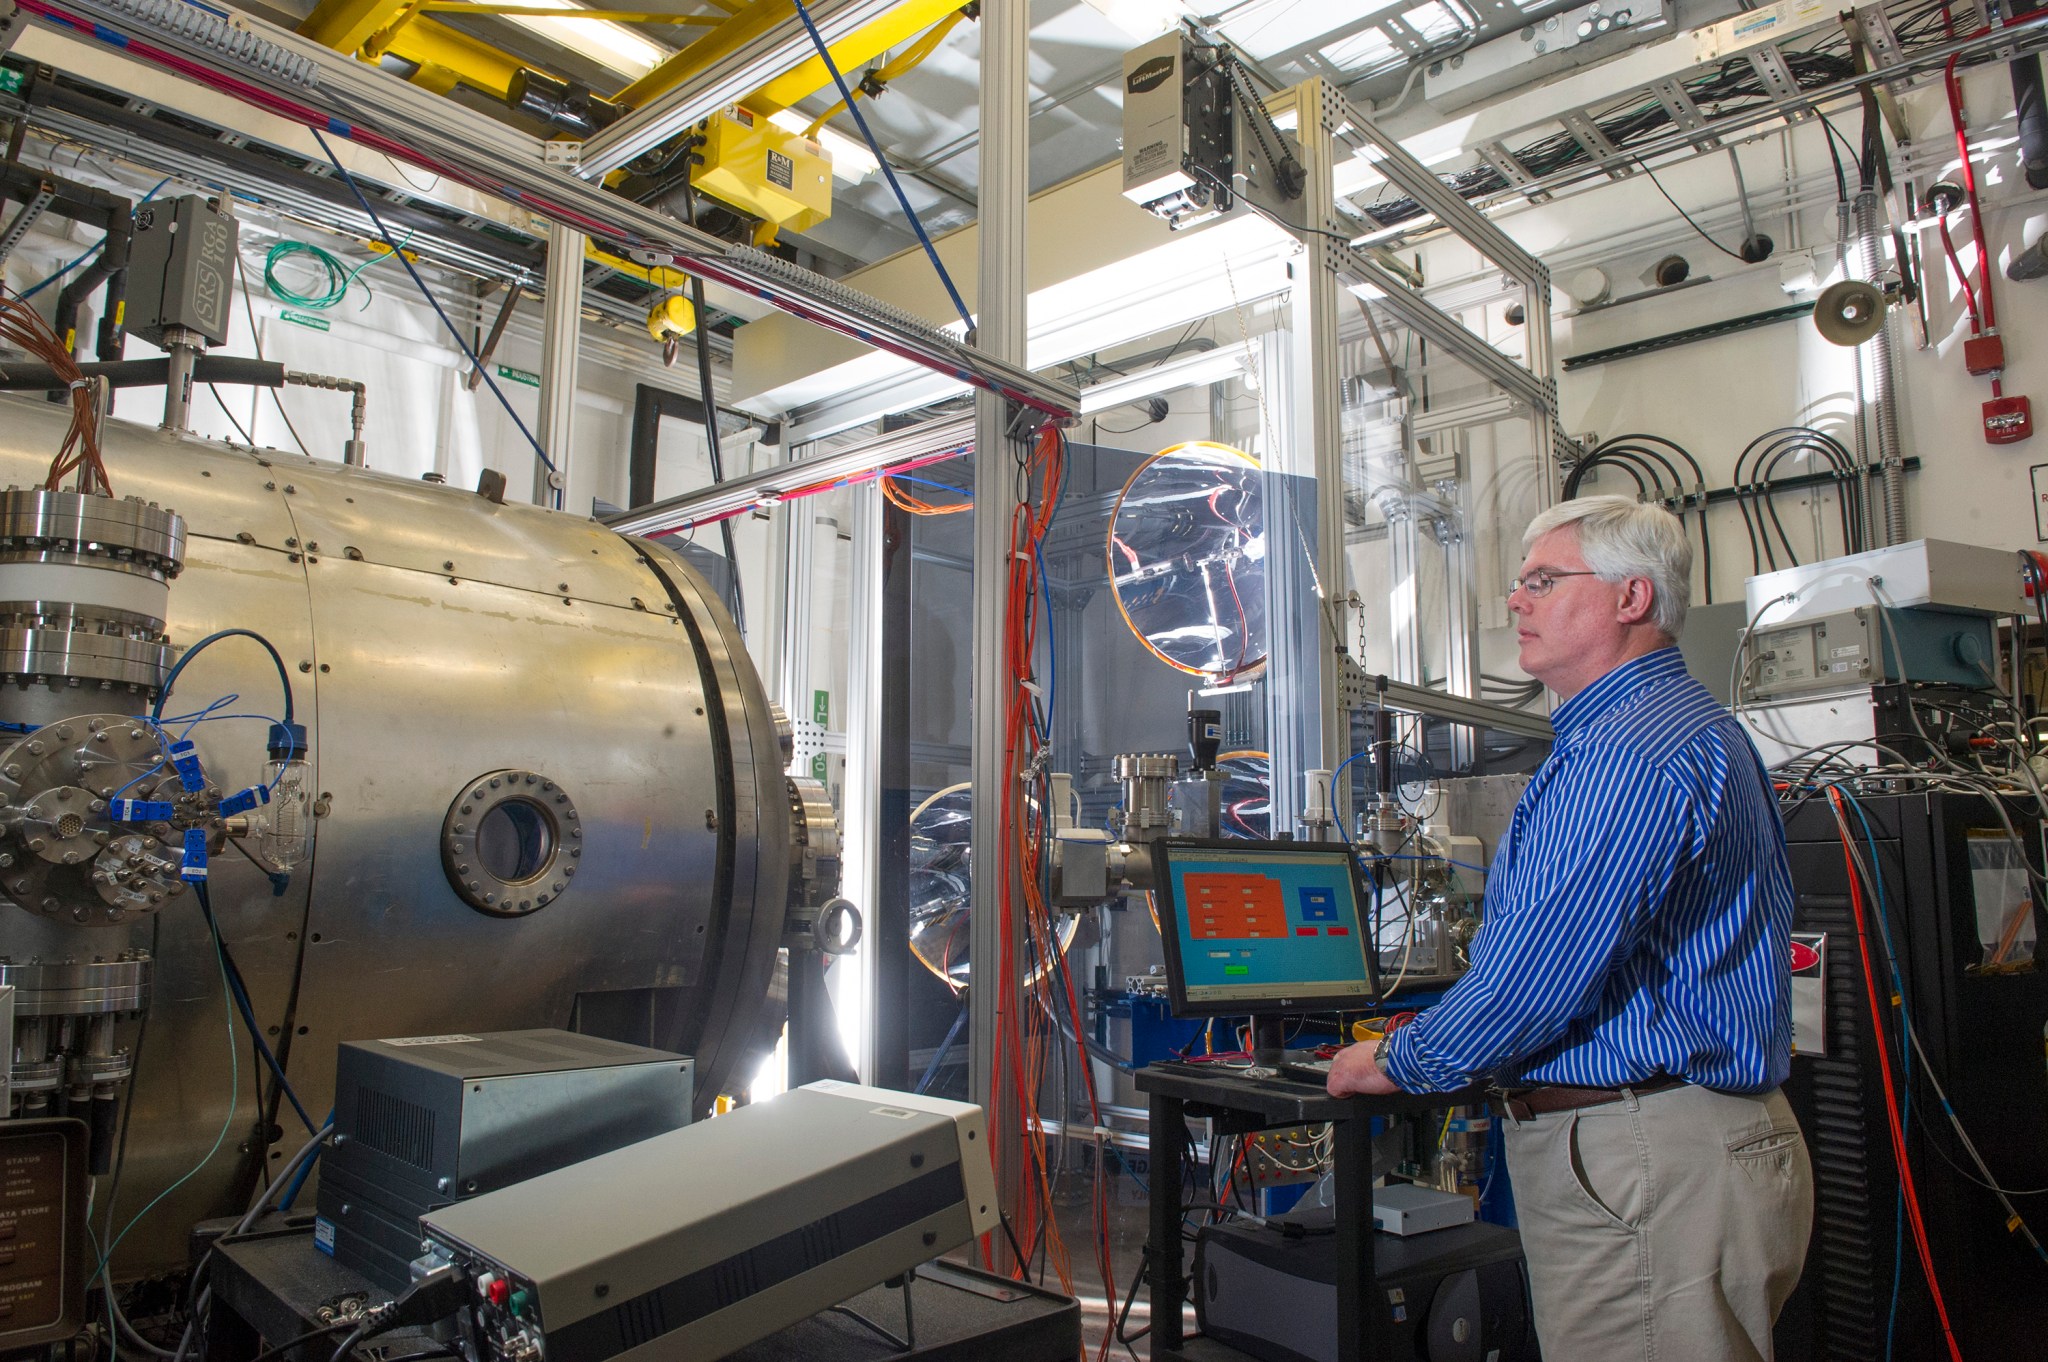 Todd Schneider adjusts the light hitting a sample inside the High Intensity Solar Environment Test system chamber.